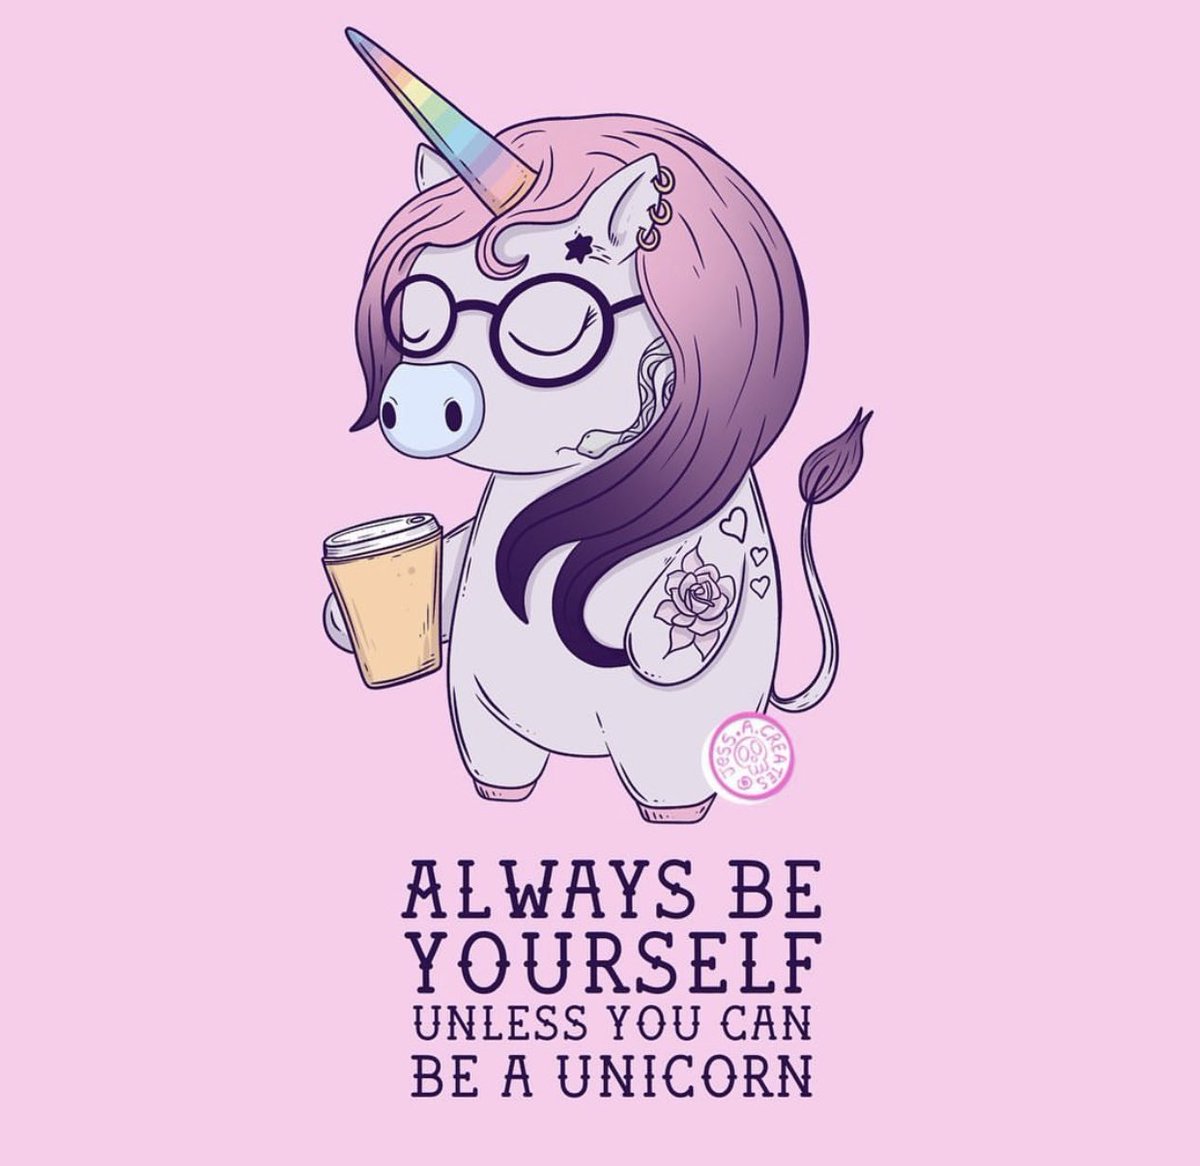 Be yourself!!! Unless you can be a unicorn - then do that!!! 🌈🌈🌈❤️❤️❤️ #love #beyourself #beyou #beaunicorn #postivevibes #youareawesome #loveyourself #beyourbestself #beyourbiggestfan